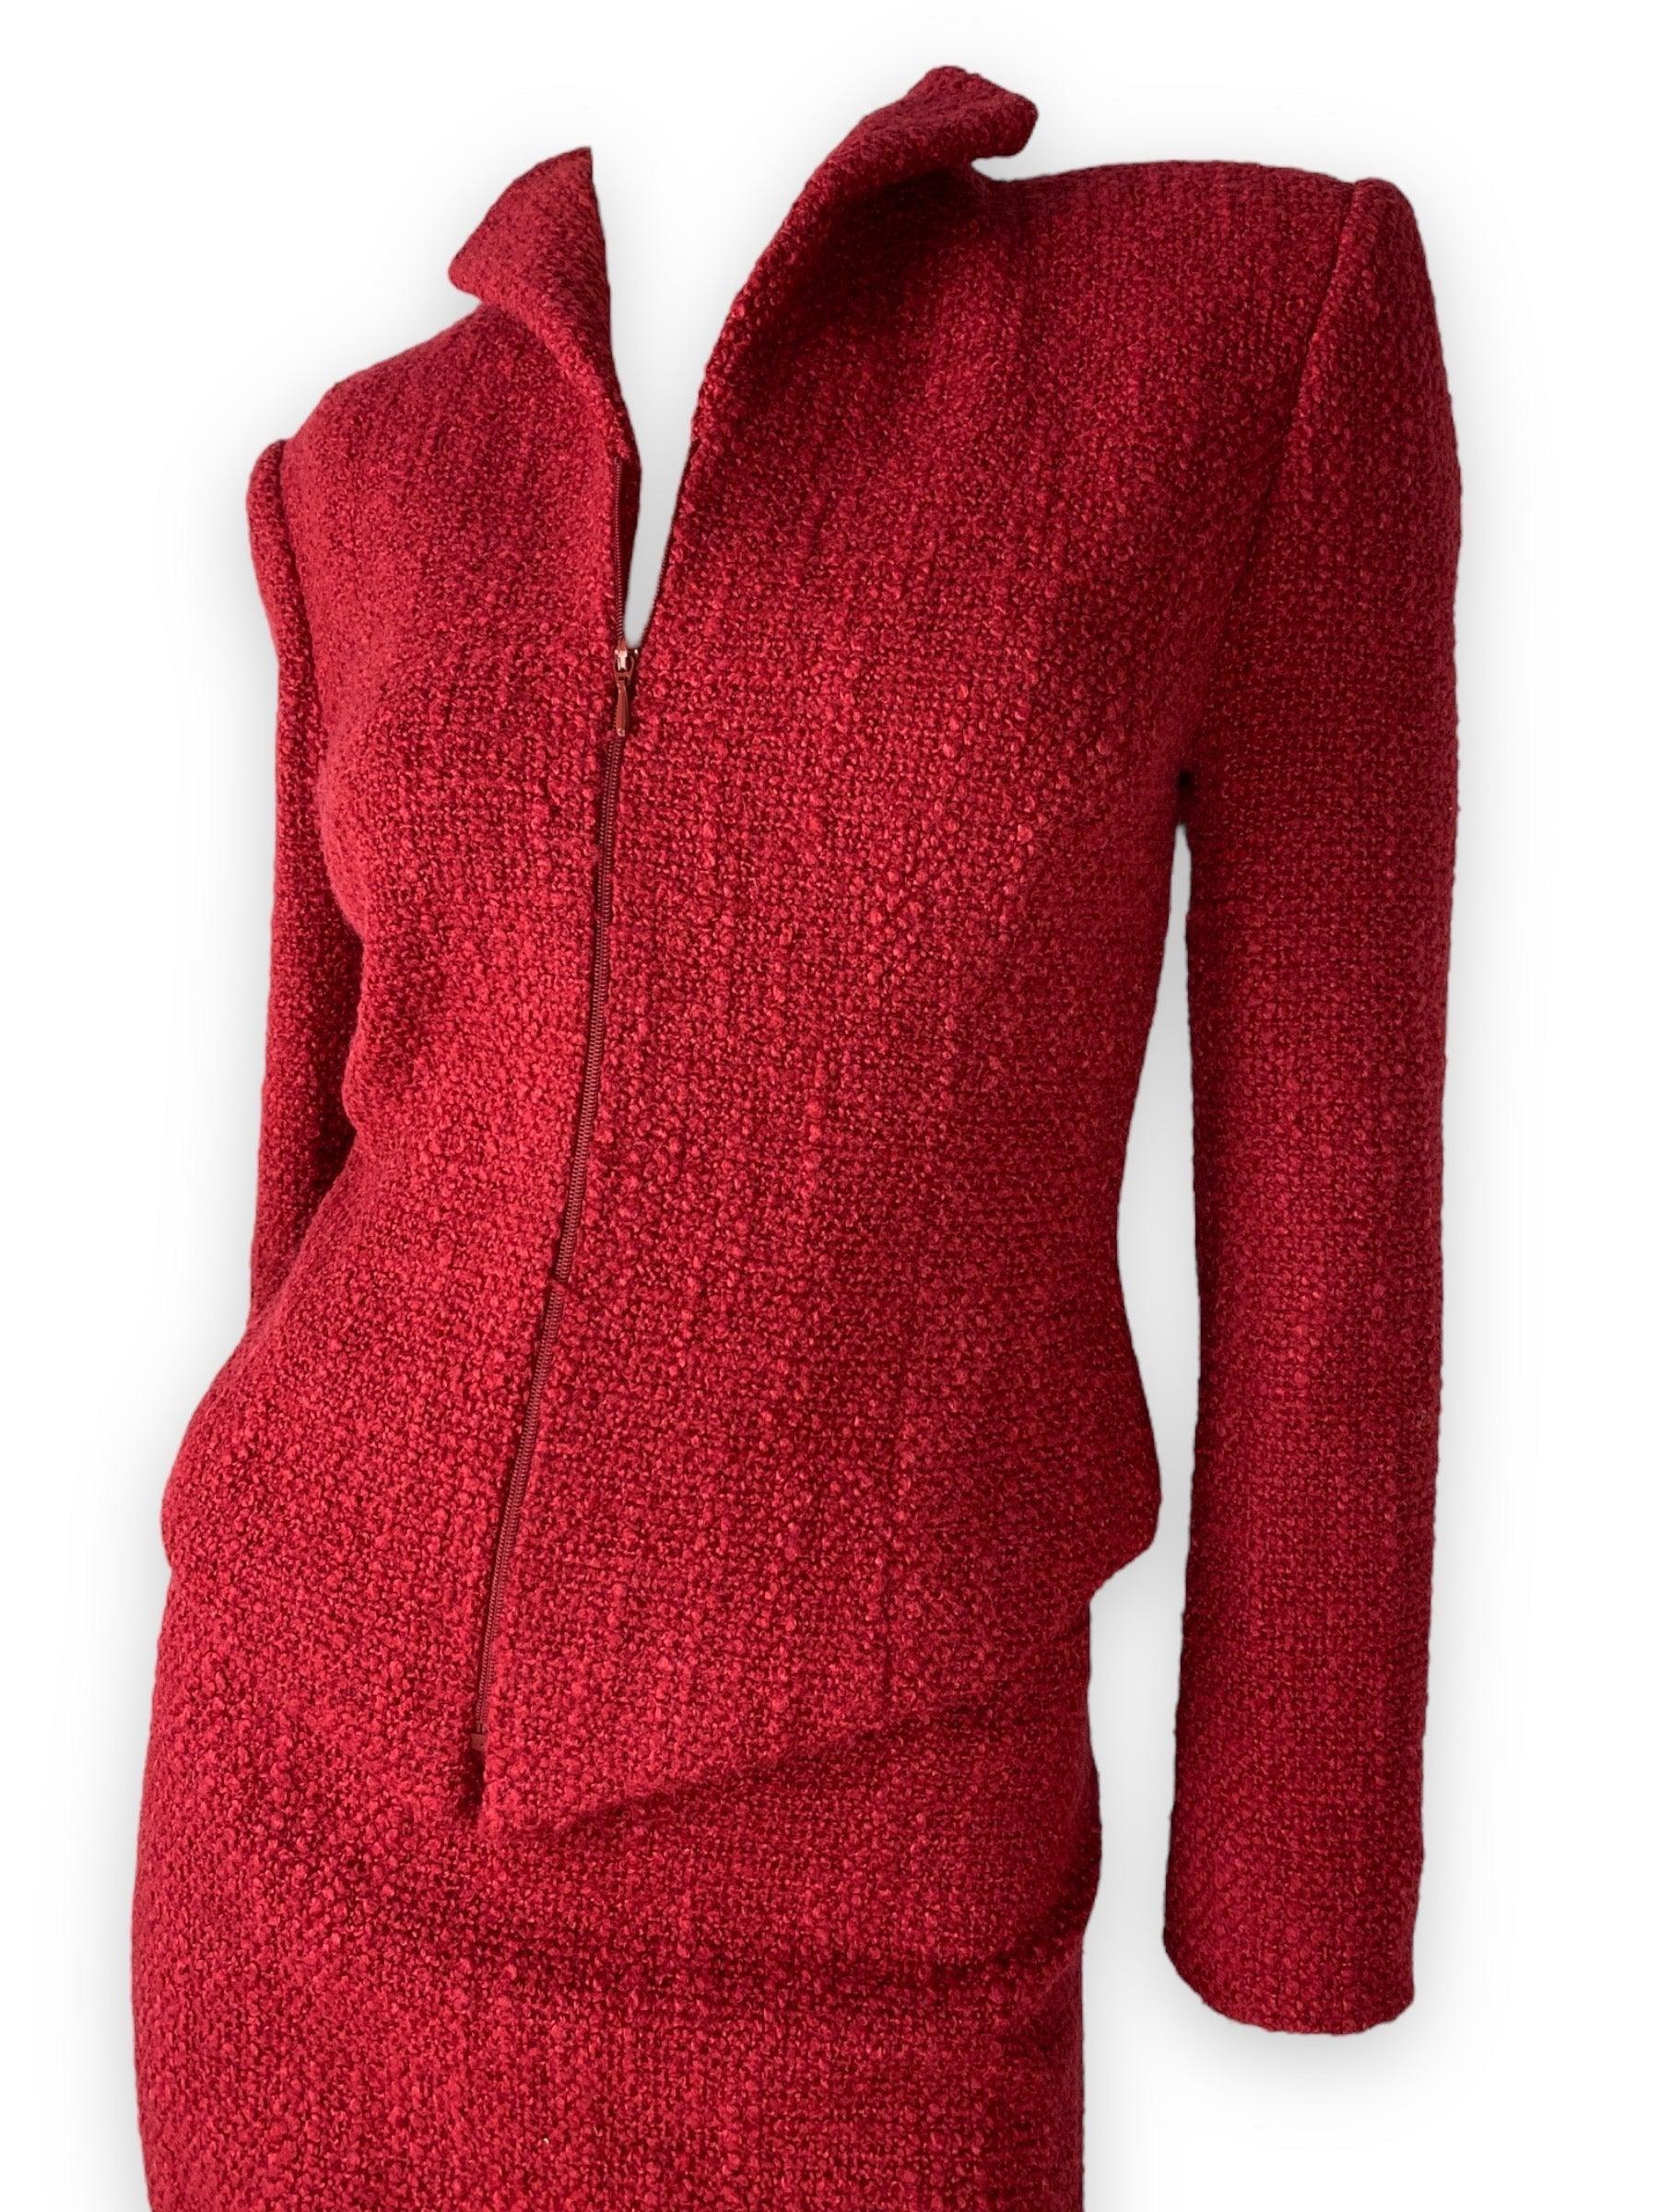 The Classy Woollen Red One - Known Source